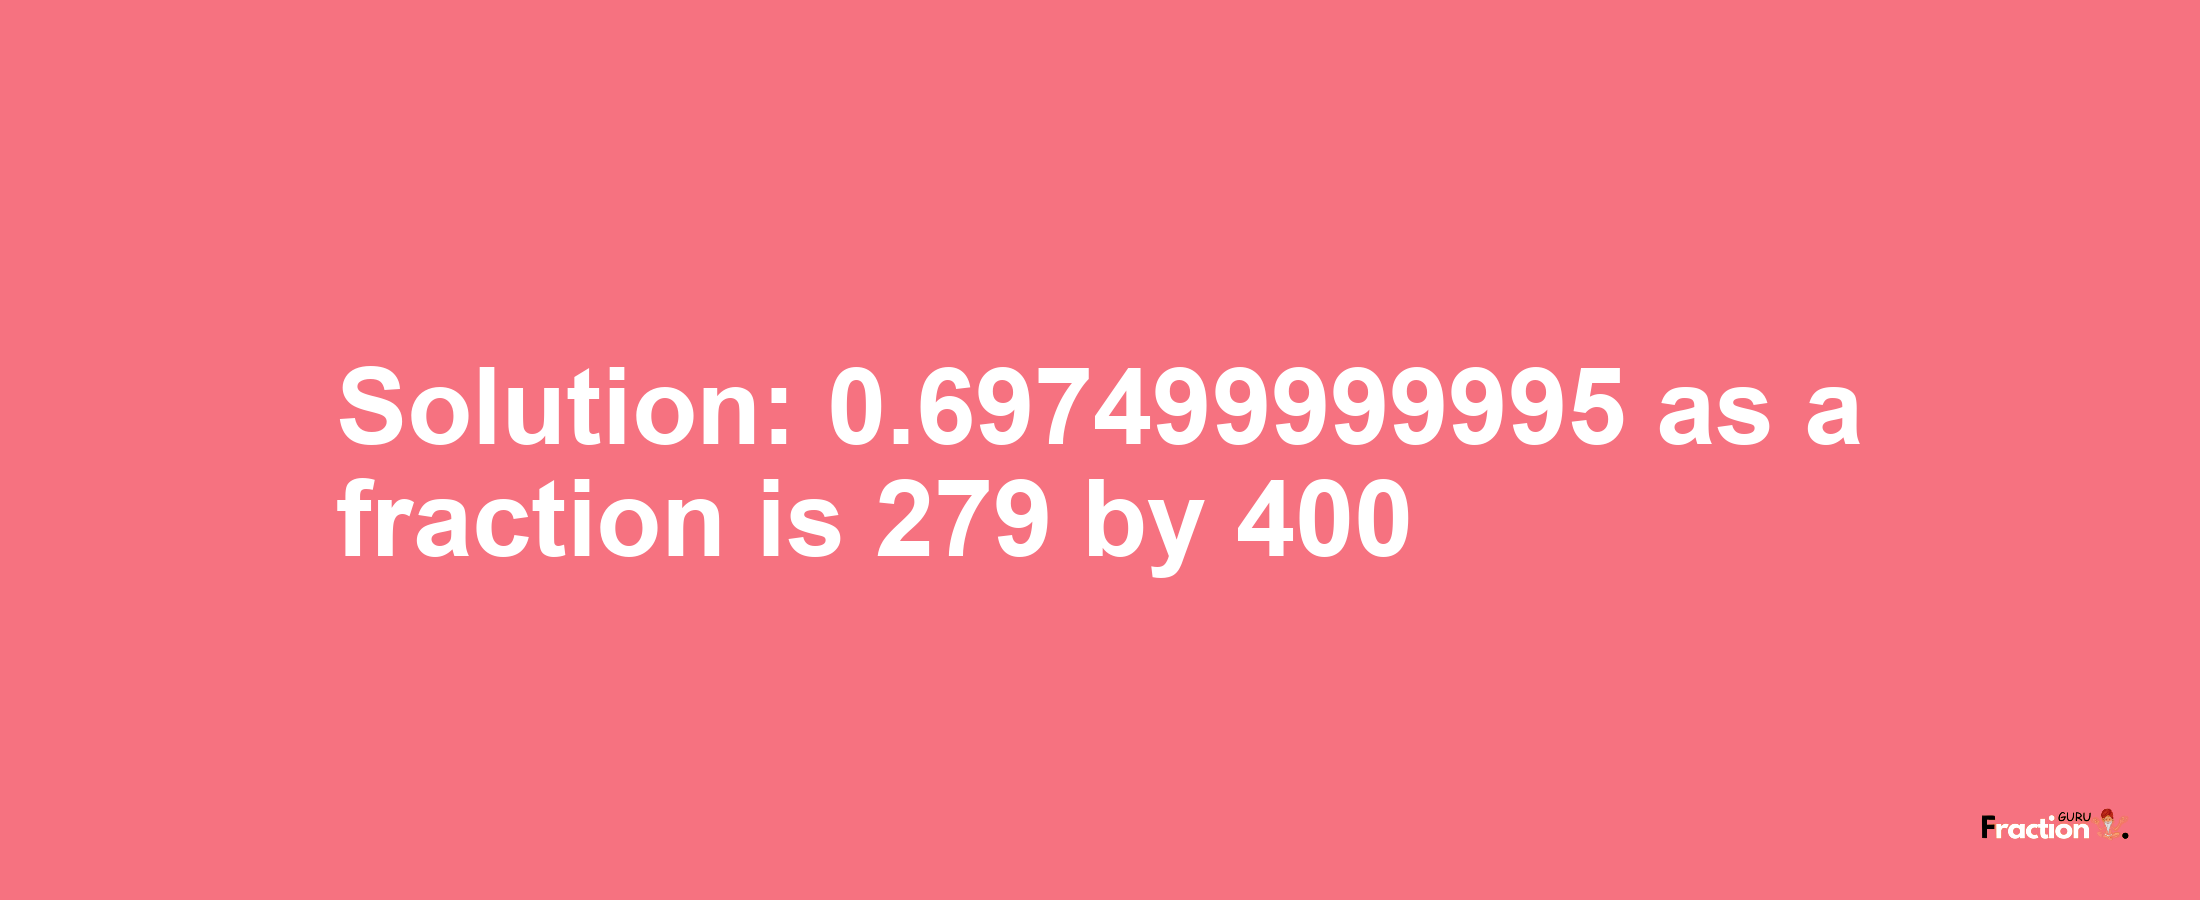 Solution:0.697499999995 as a fraction is 279/400